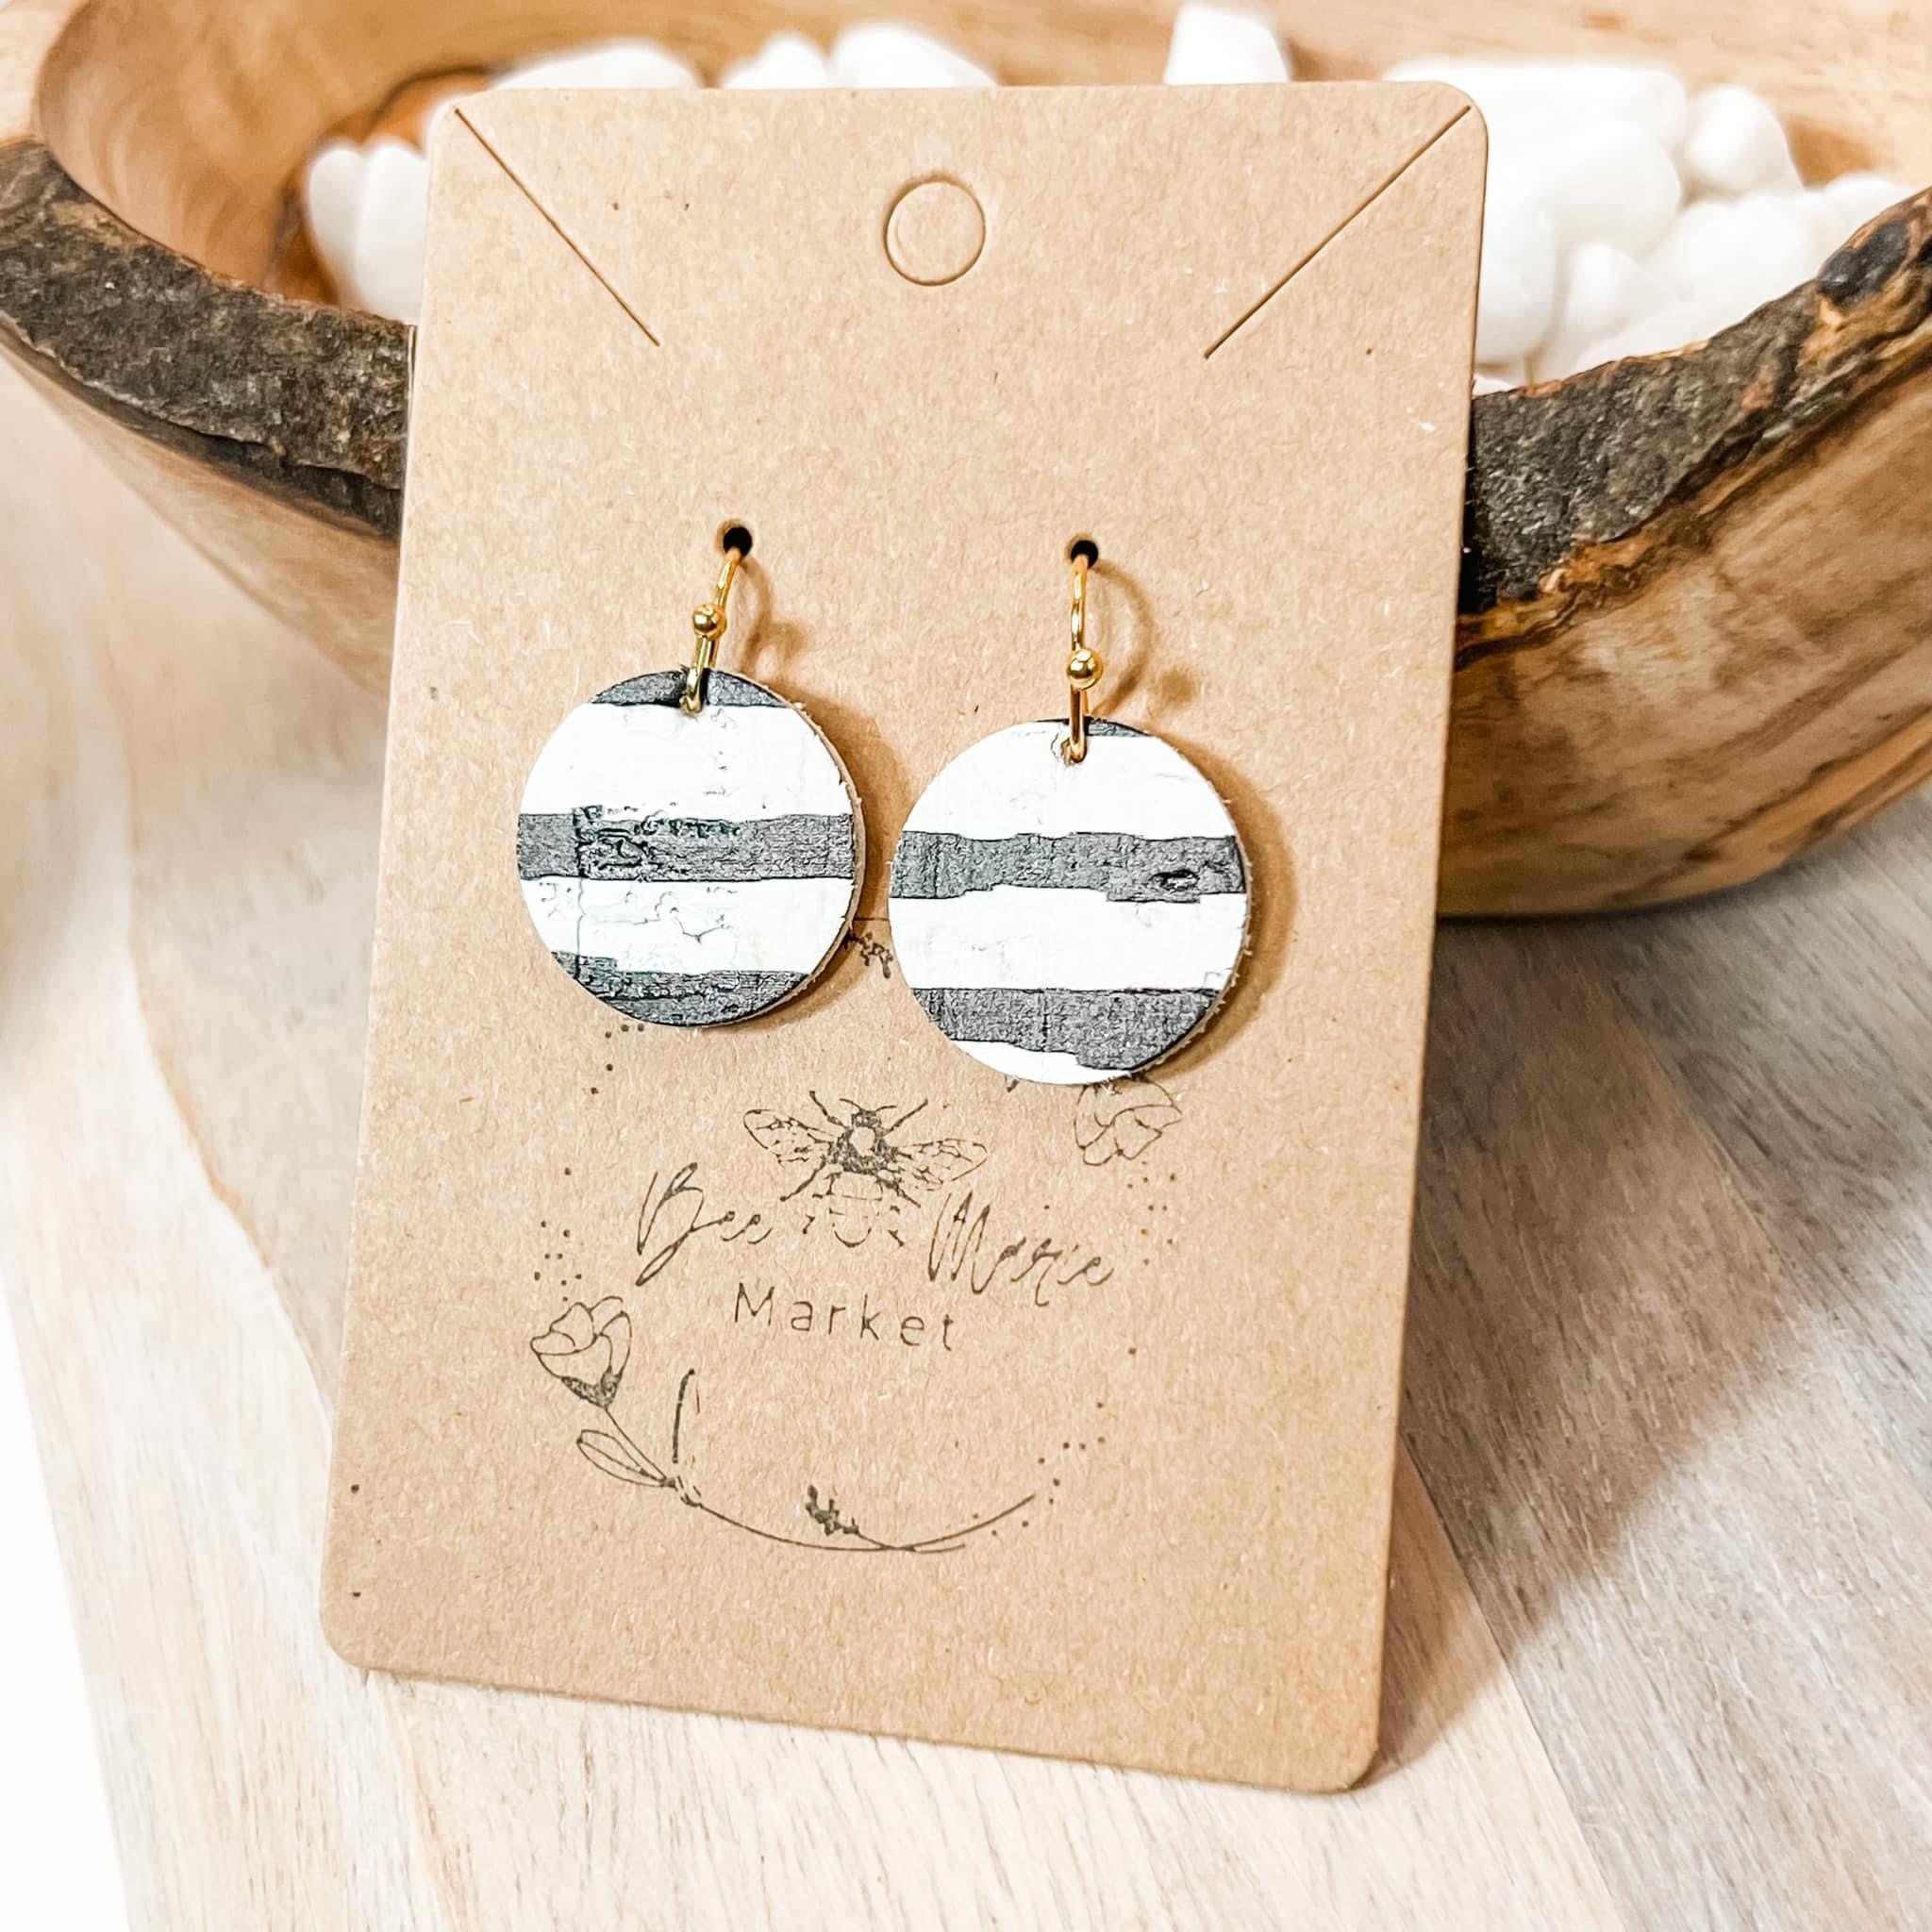 Sally Round Leather Striped Earrings